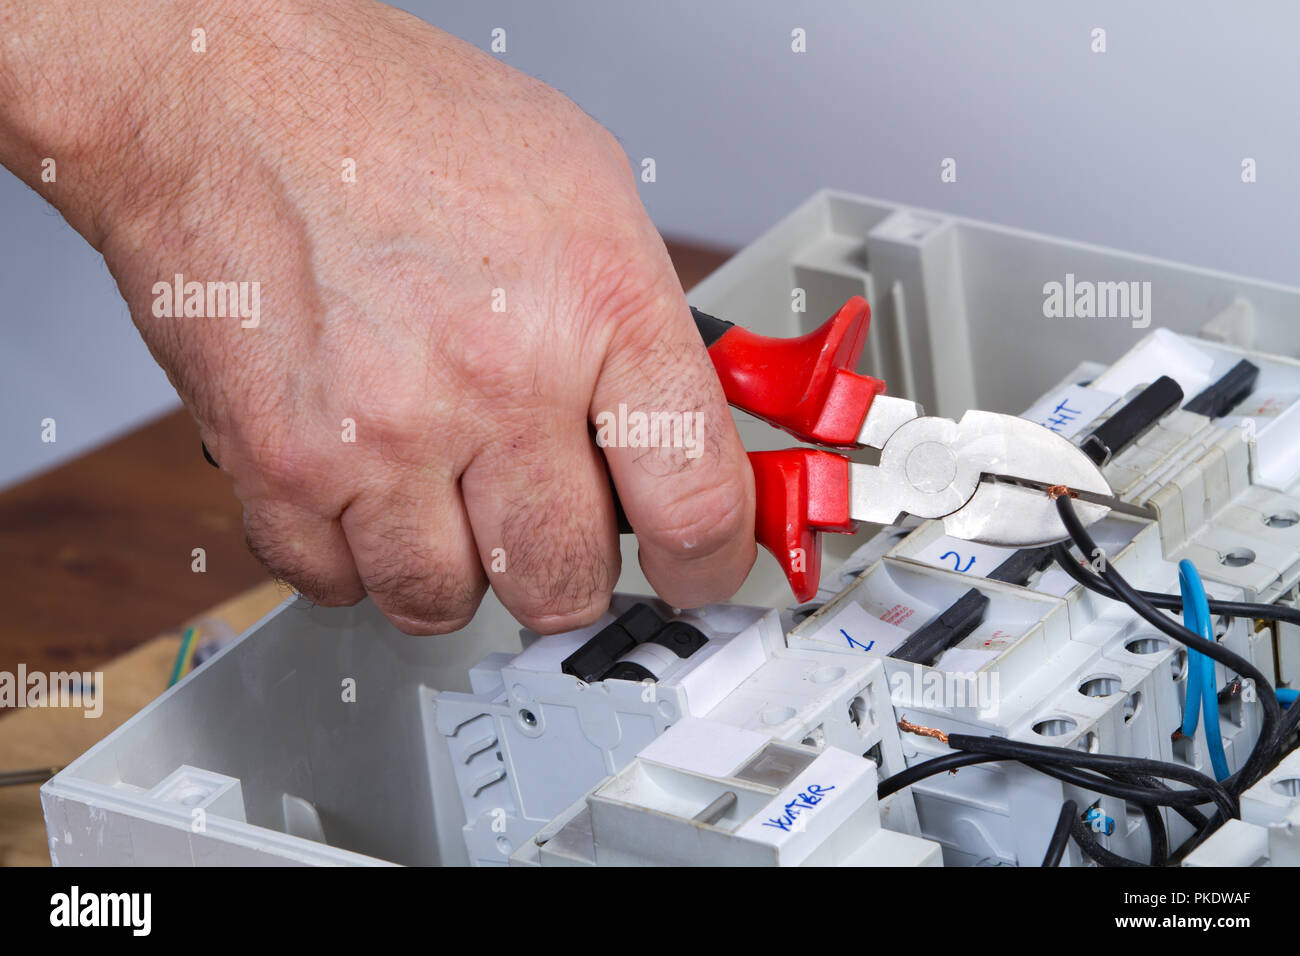 electrician at work with an appliance Stock Photo